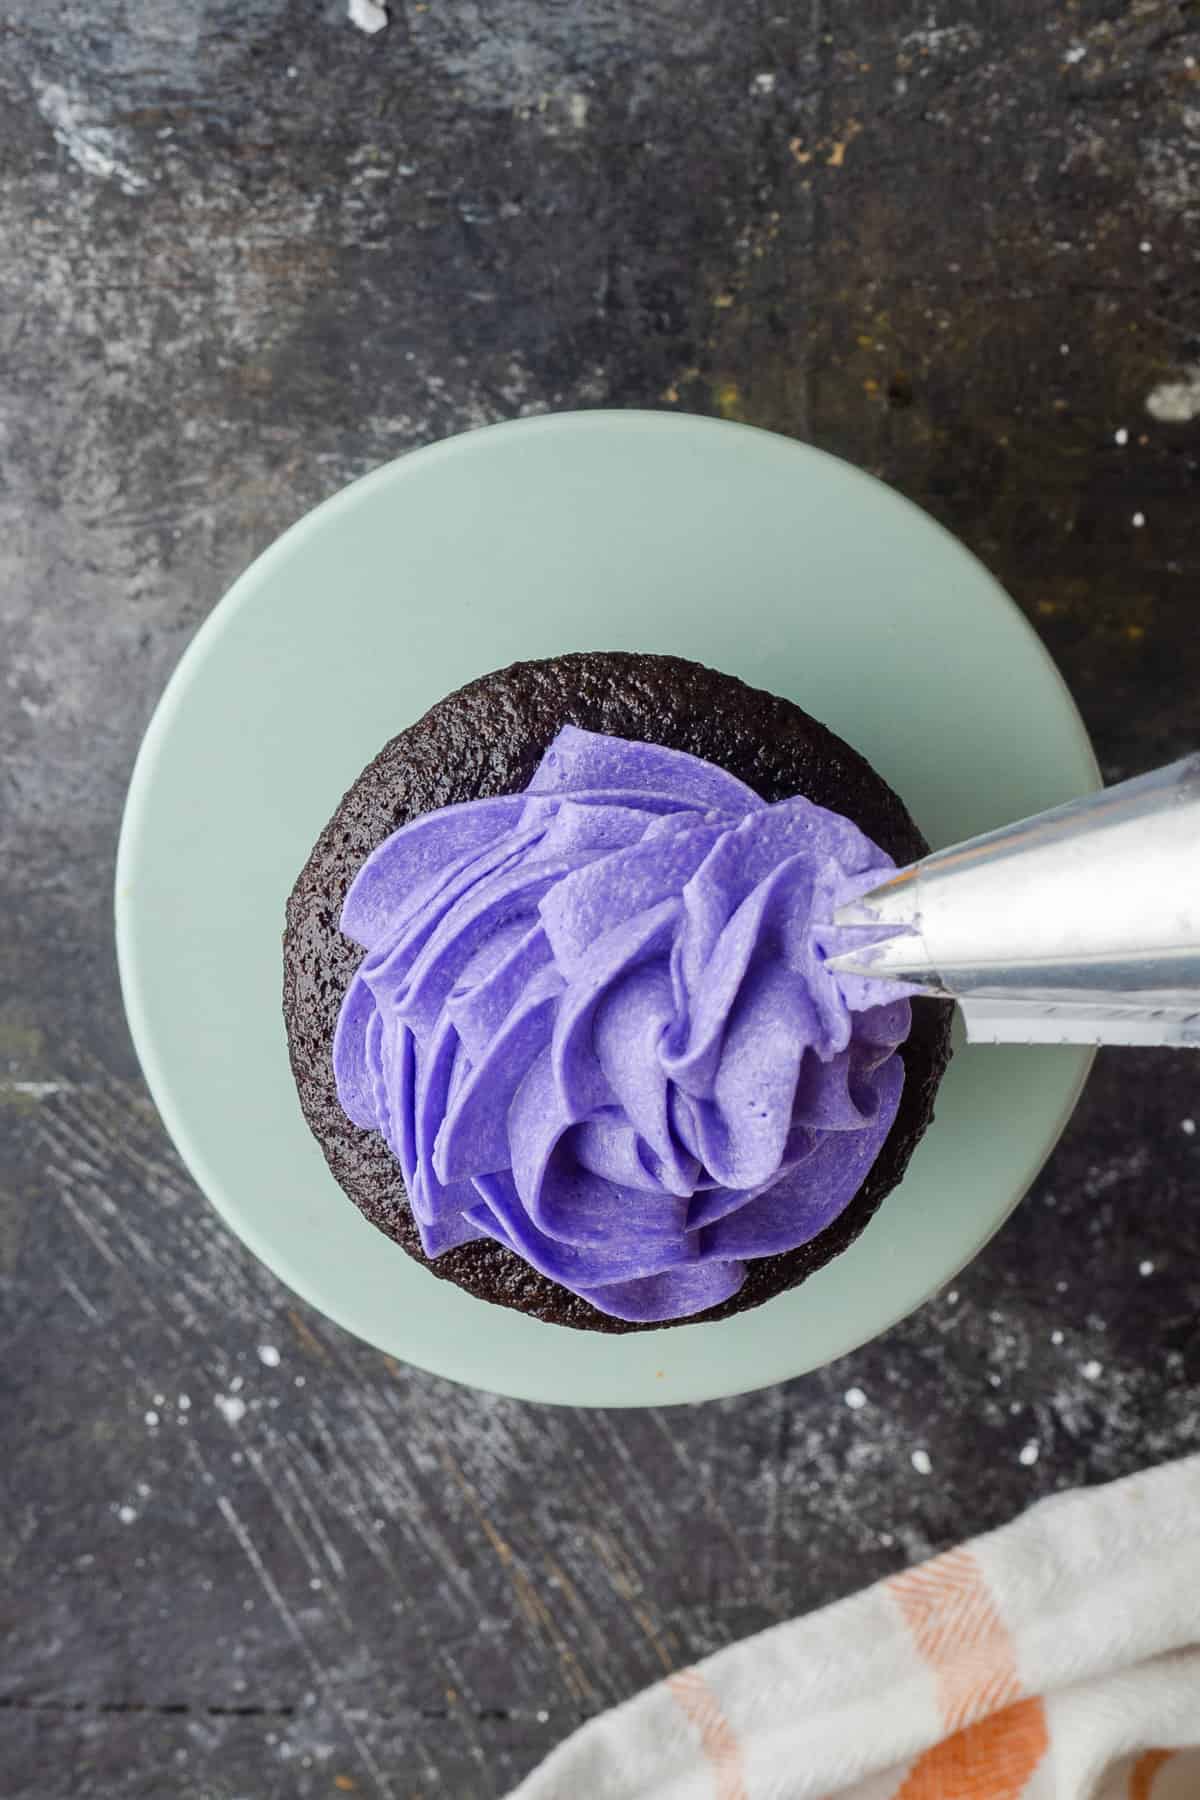 Using the piping tip to pull the swirl of purple frosting off the side of the cupcake for a lopsided appearance.